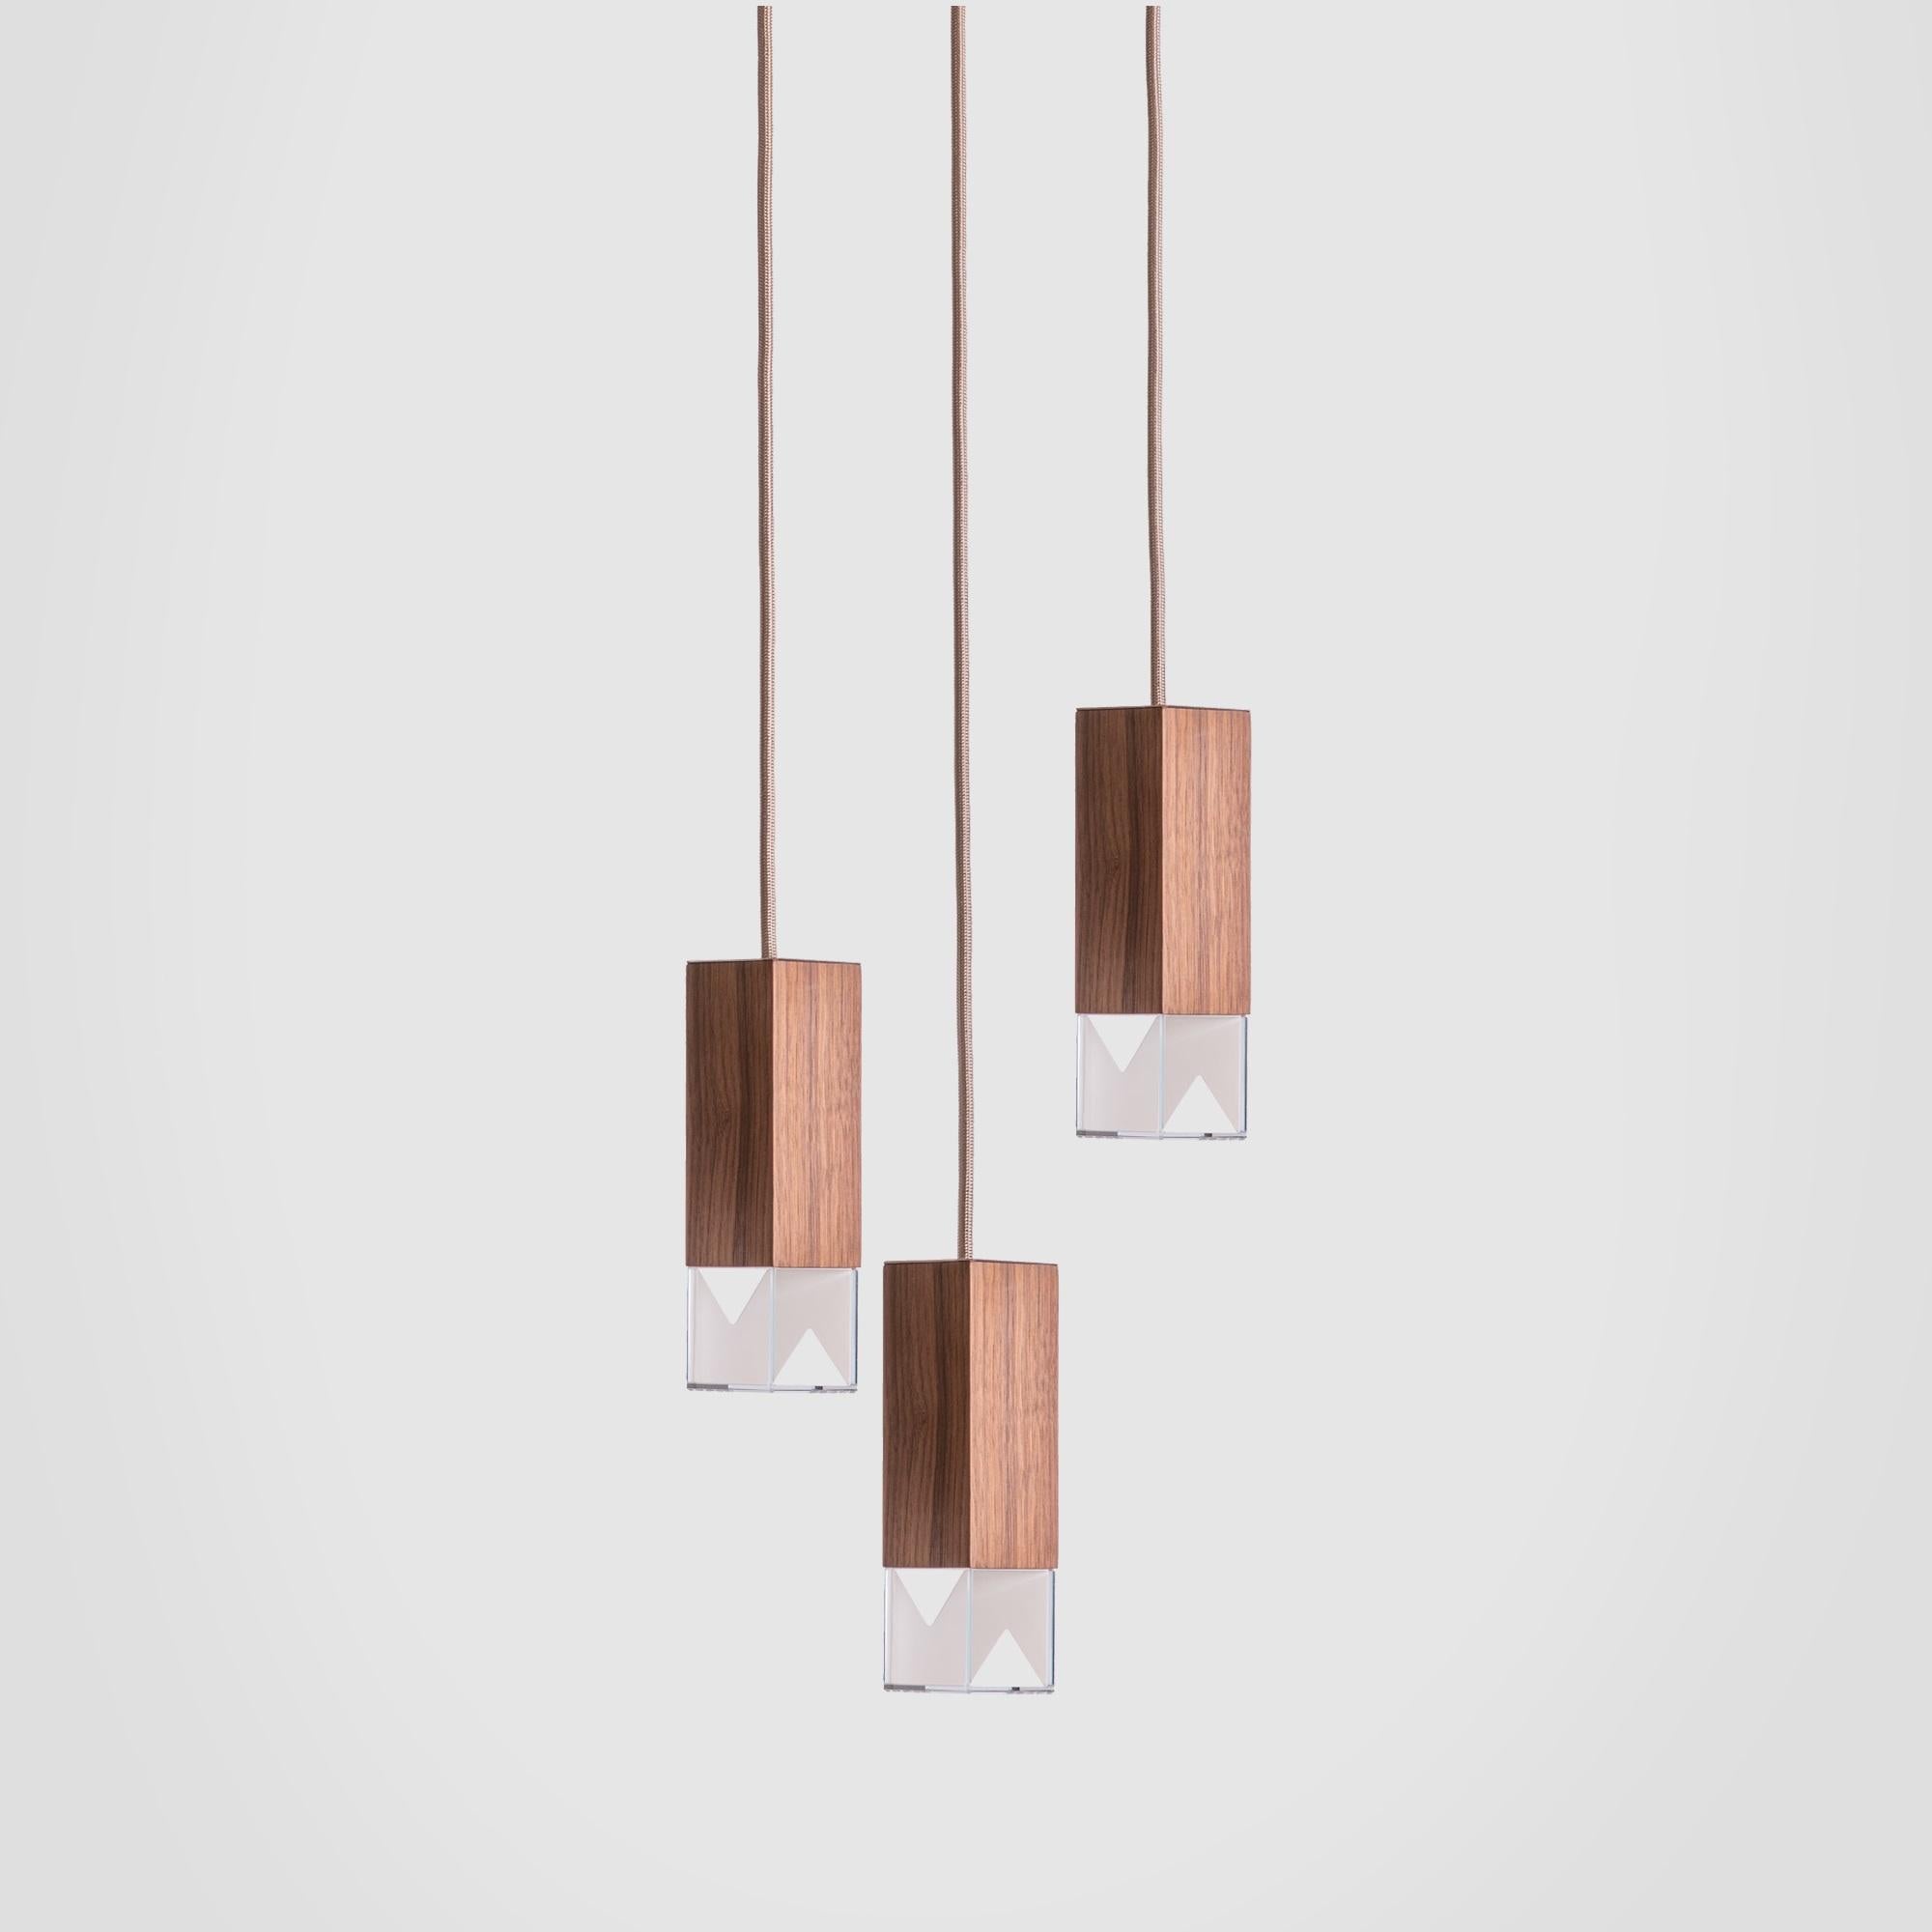 This exclusive chandelier has a minimalist silhouette that will be best showcased above a dining room table, in a foyer or bedroom in a modern decor. This piece is composed of three rectangular shades hanging at different lengths from a